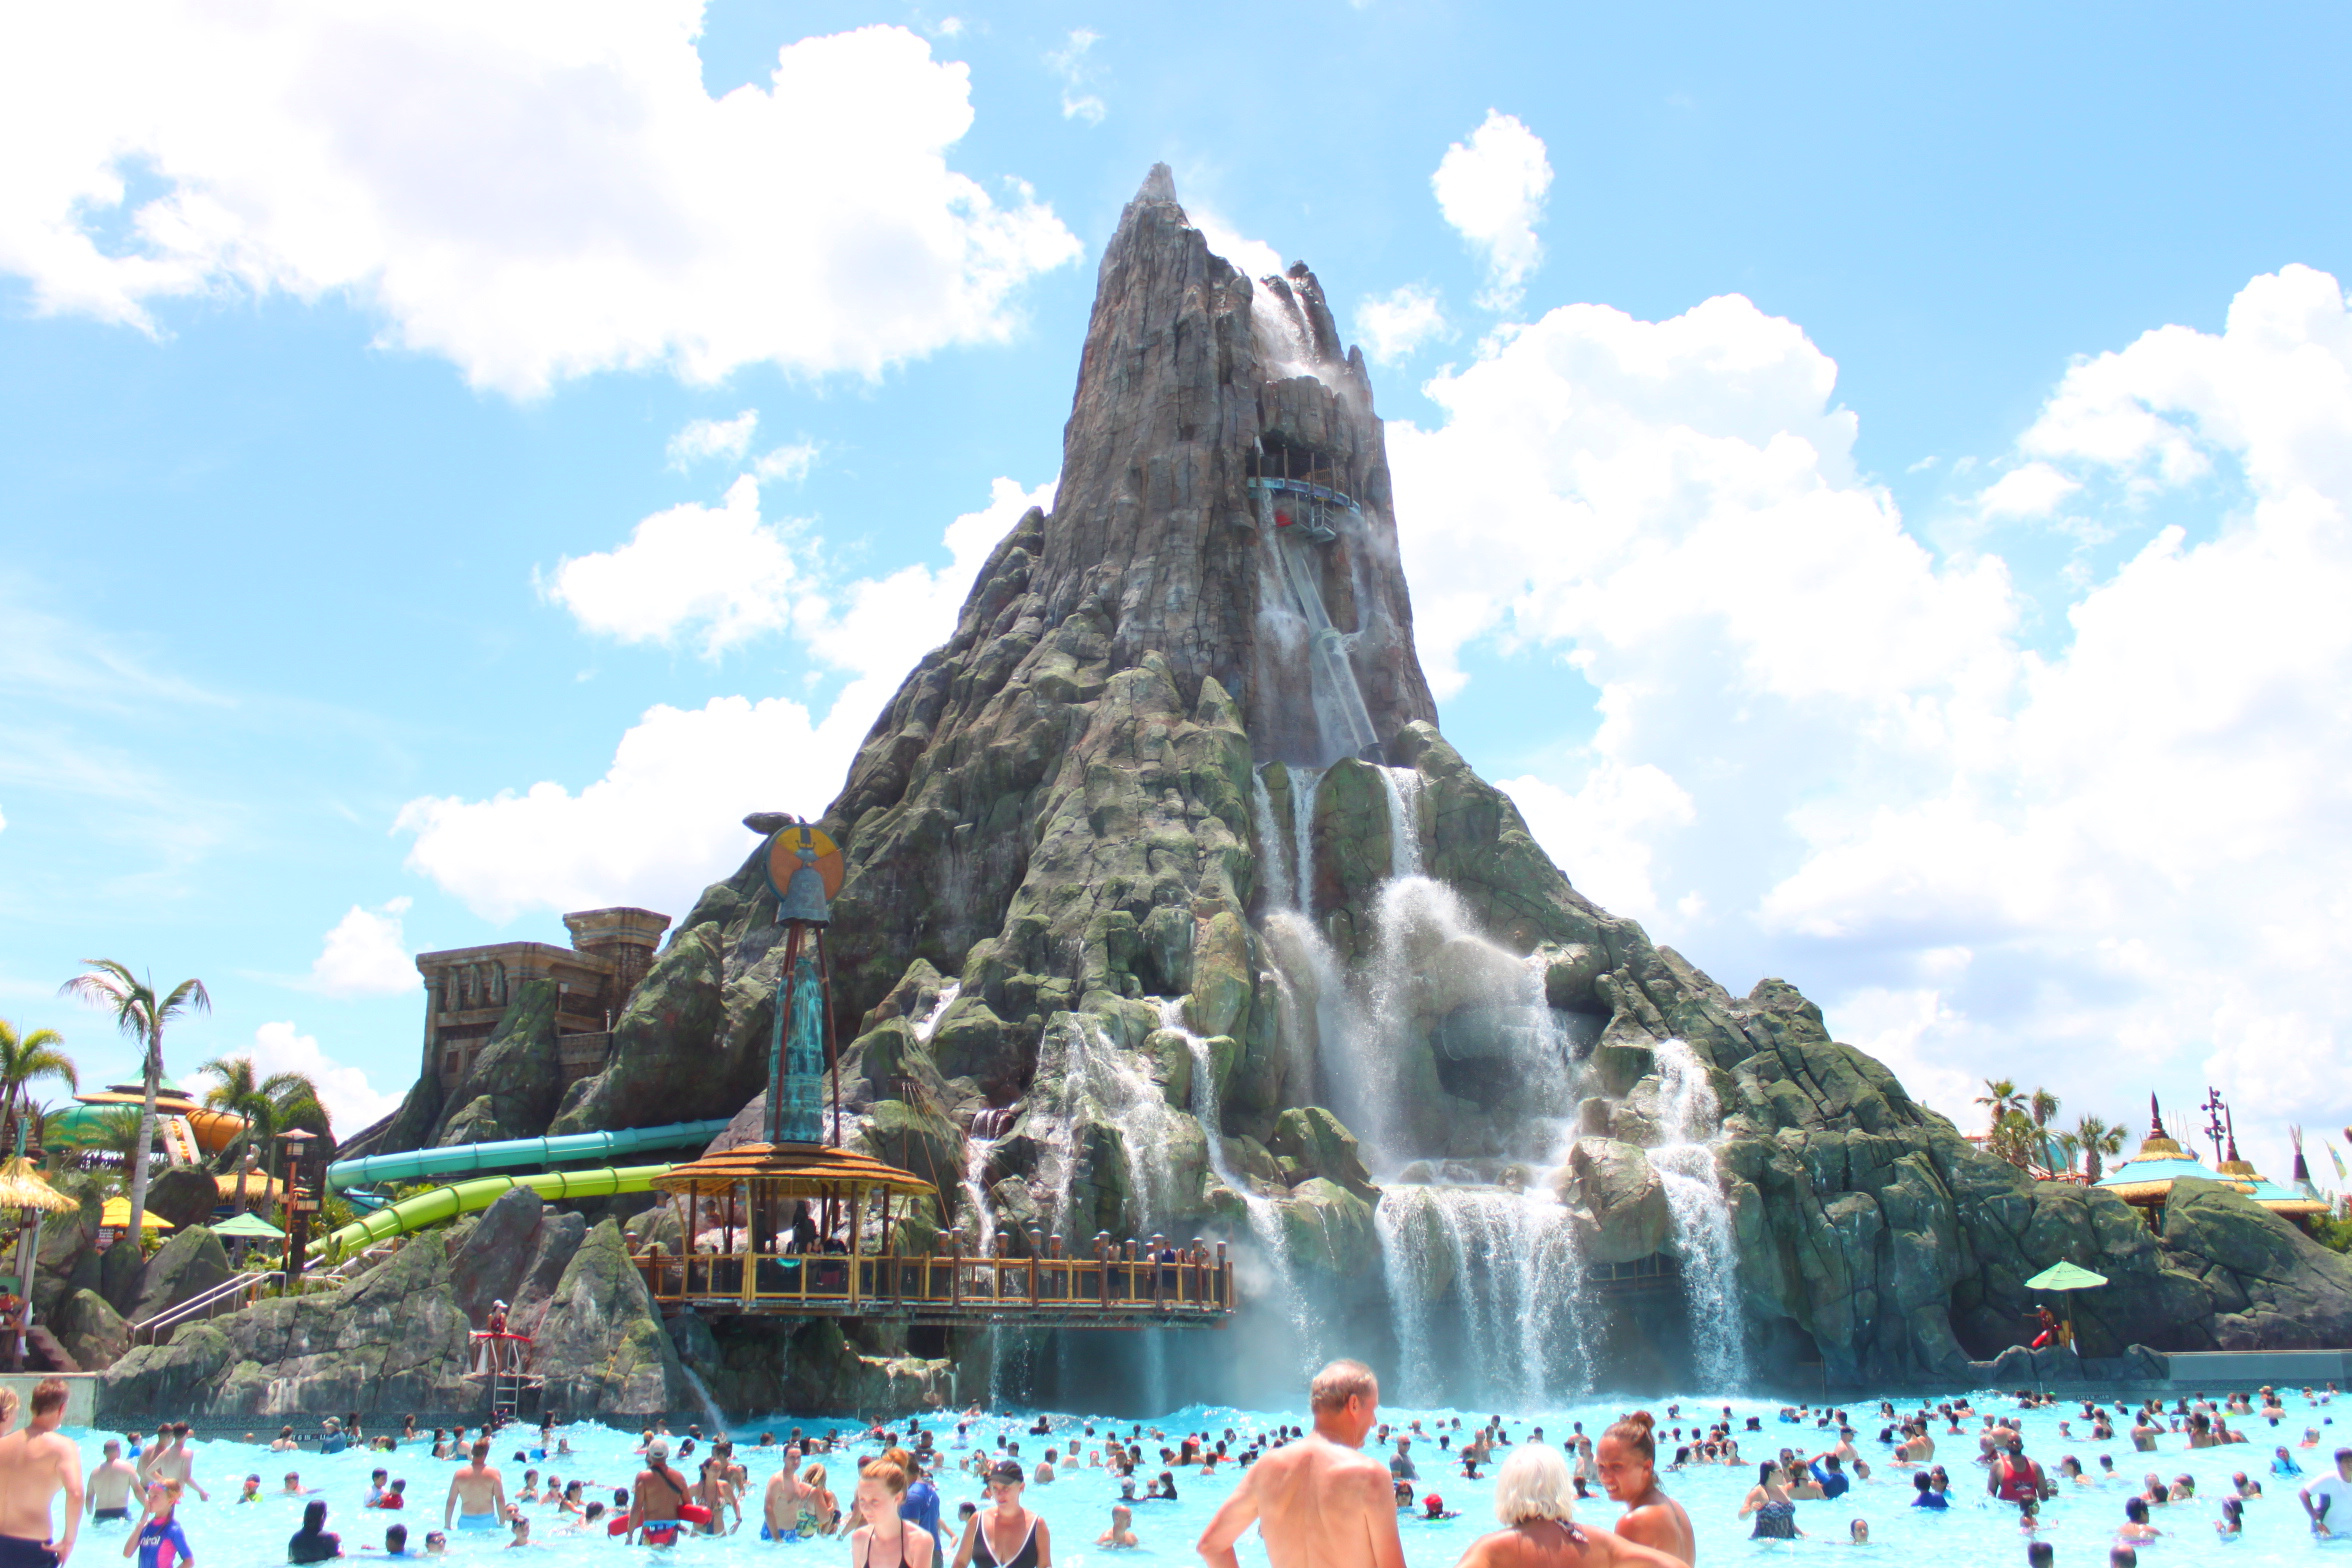 What to Bring to Volcano Bay: 2022 Packing List - Wanderful World of Travel